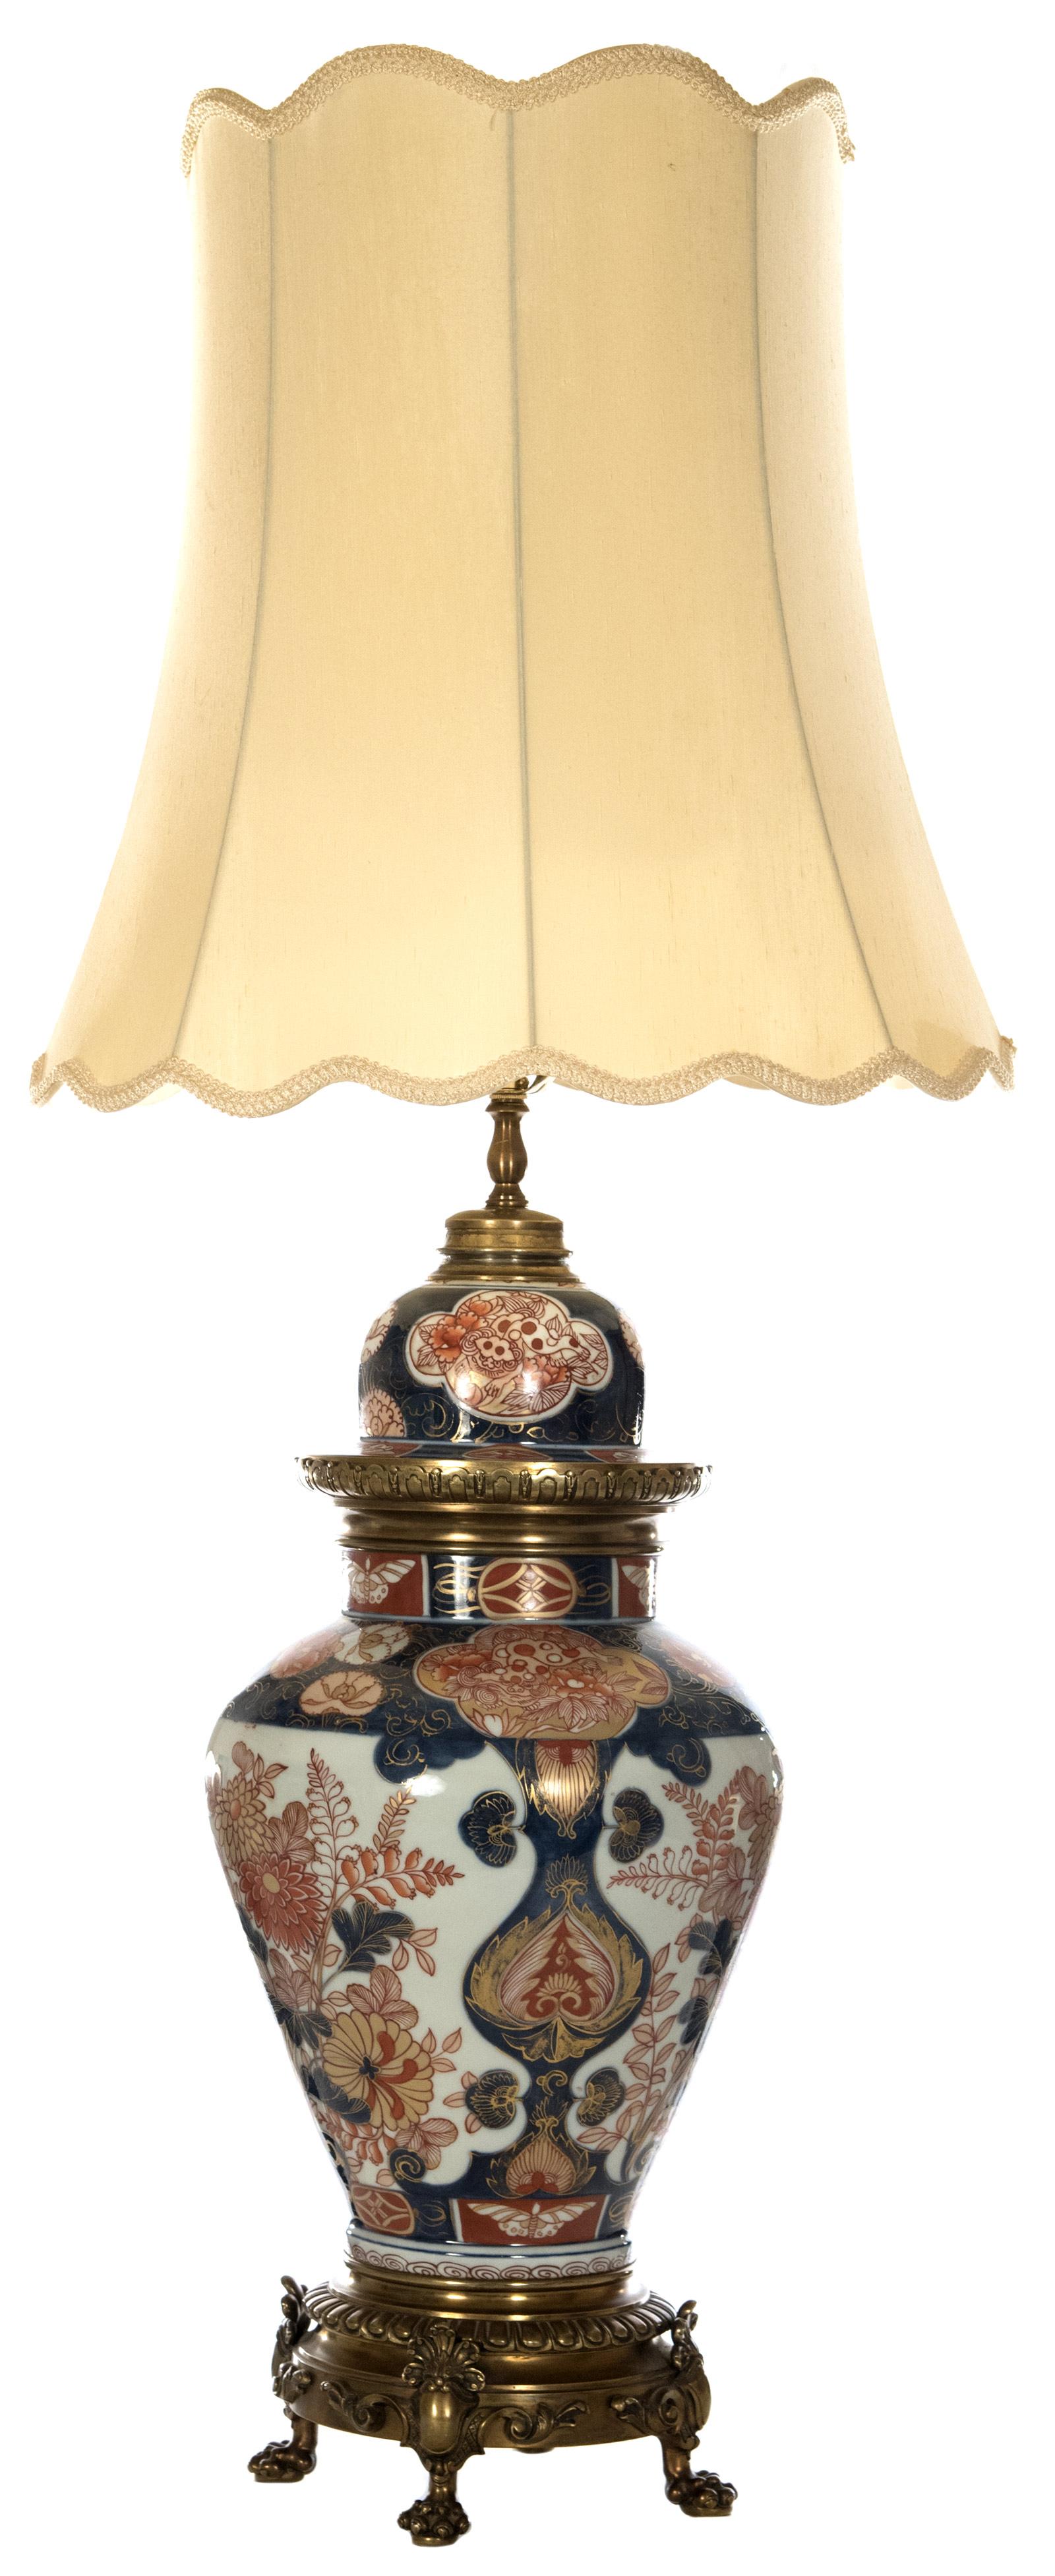 Imari Porcelain Jar and Brass Table Lamp In Good Condition For Sale In Salt Lake City, UT